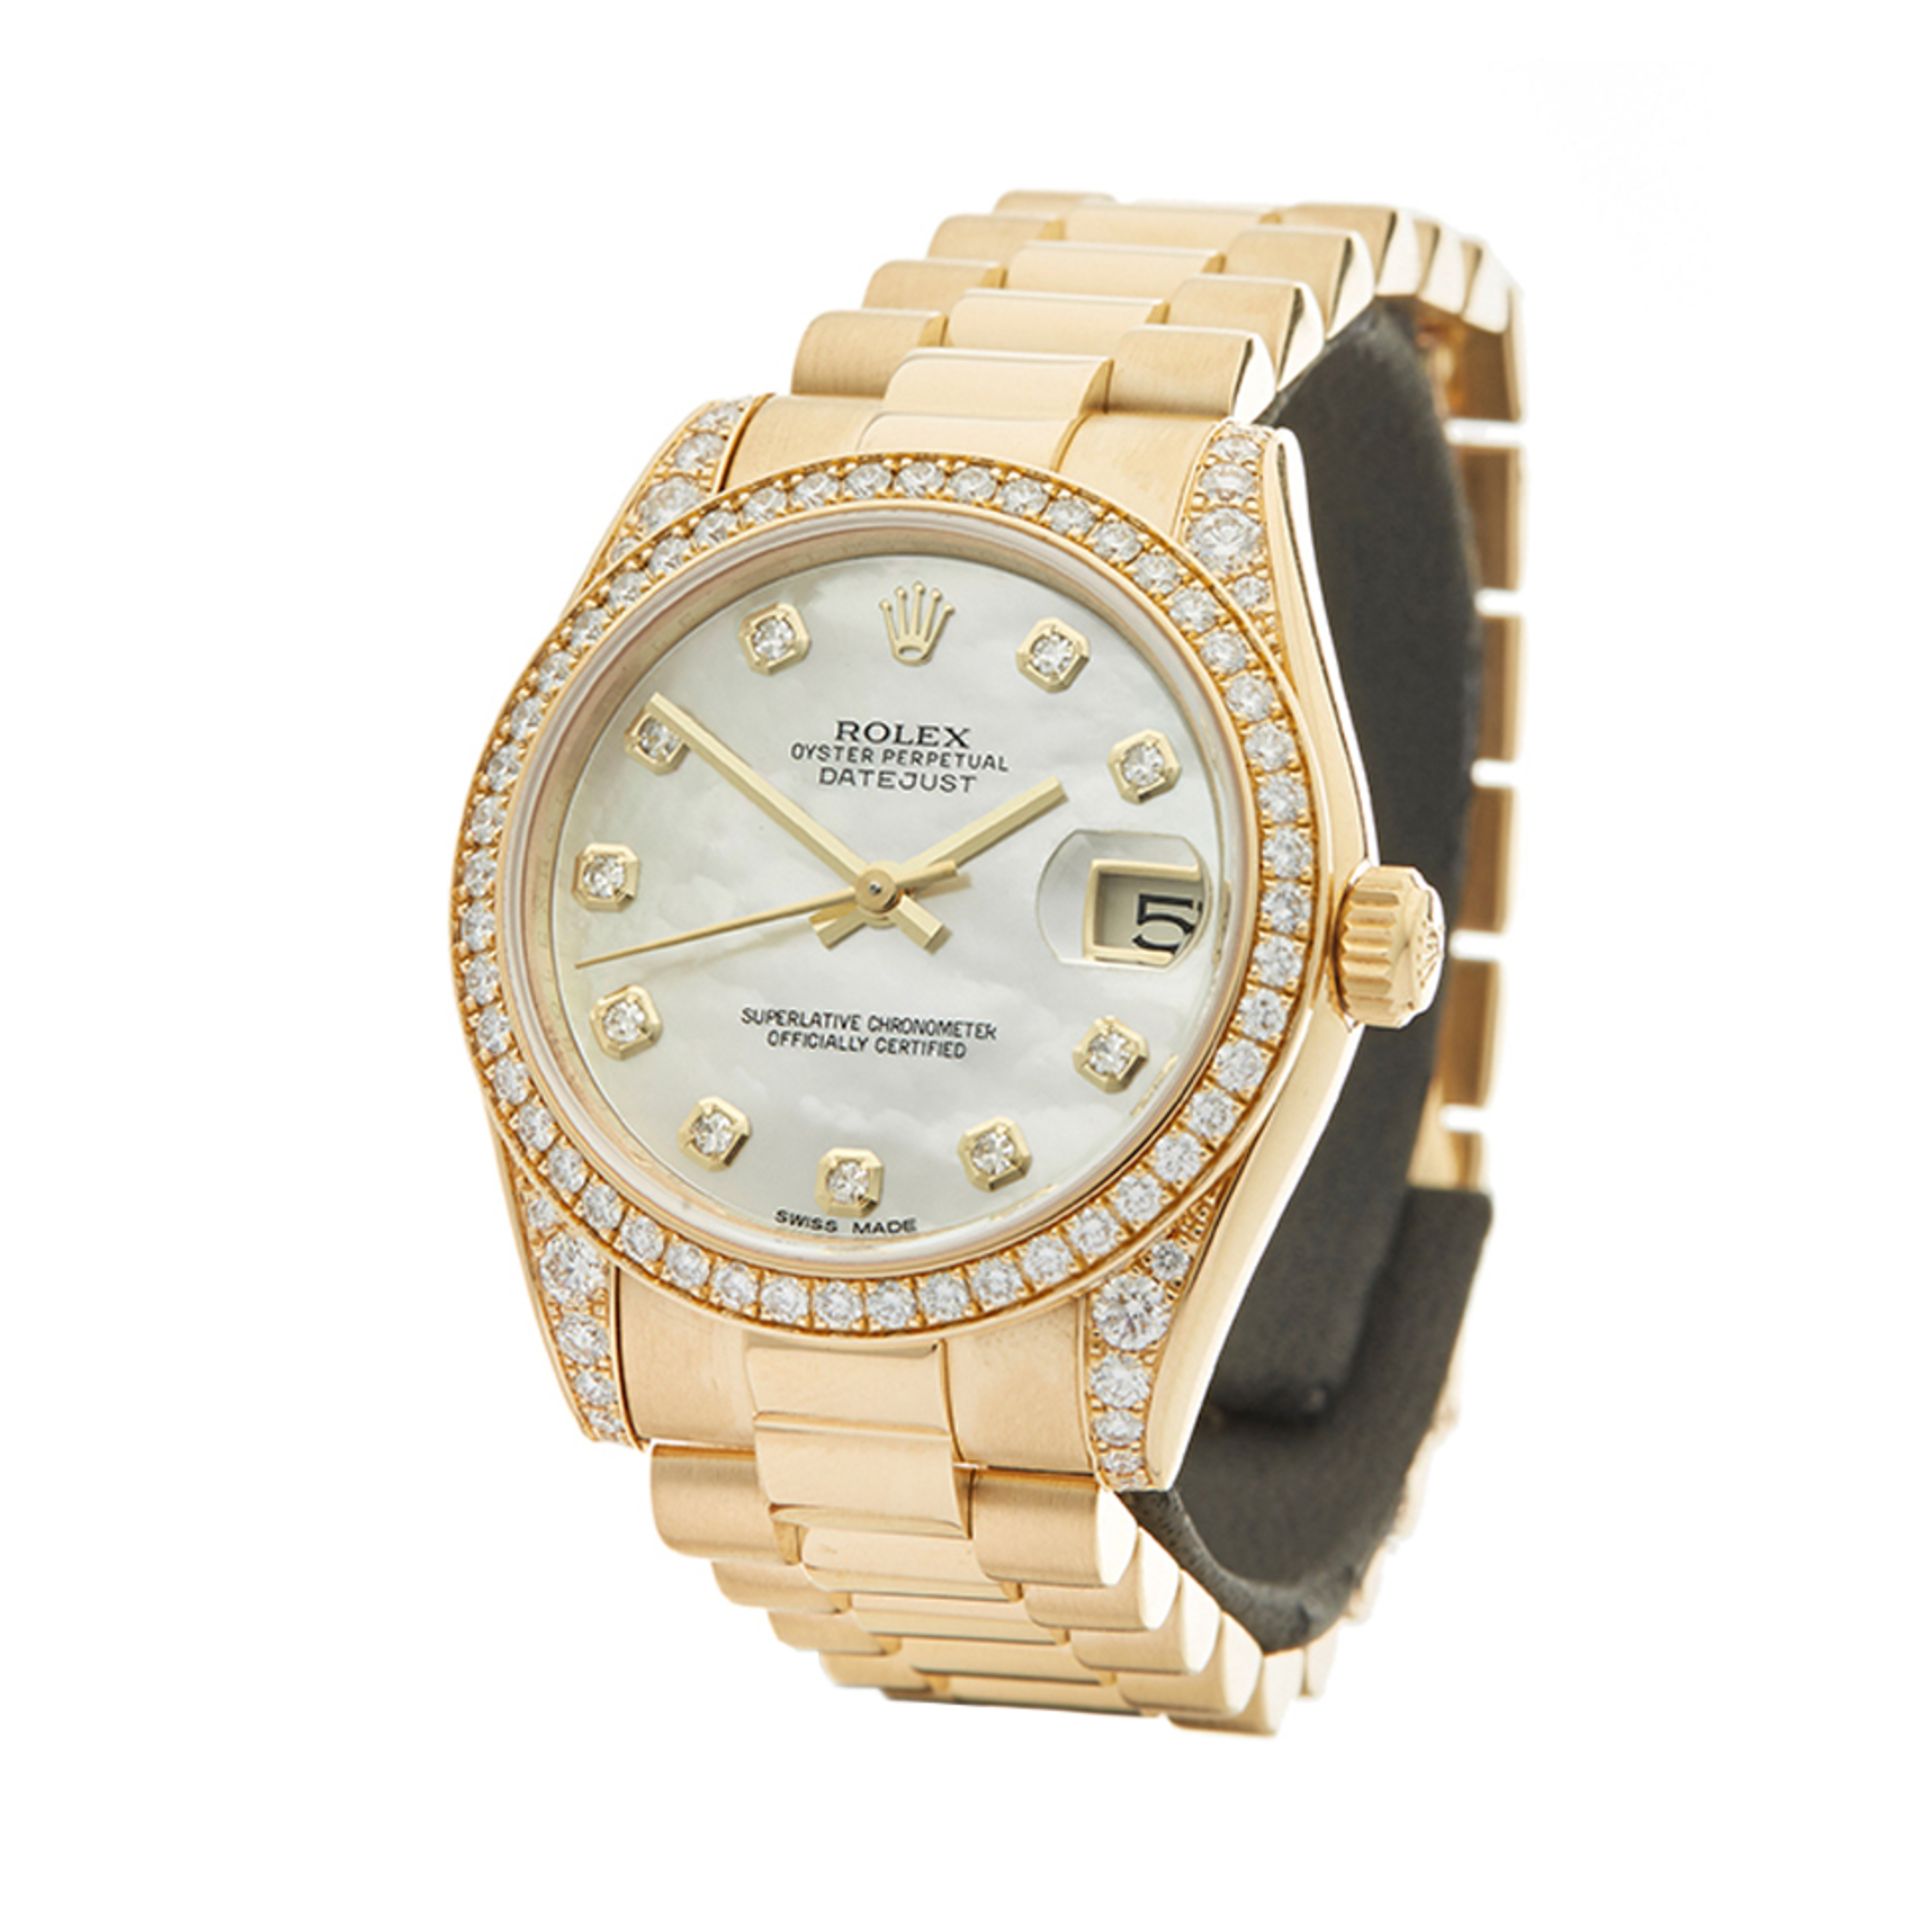 Datejust 31mm 18K Yellow Gold - 178158 - Image 3 of 8